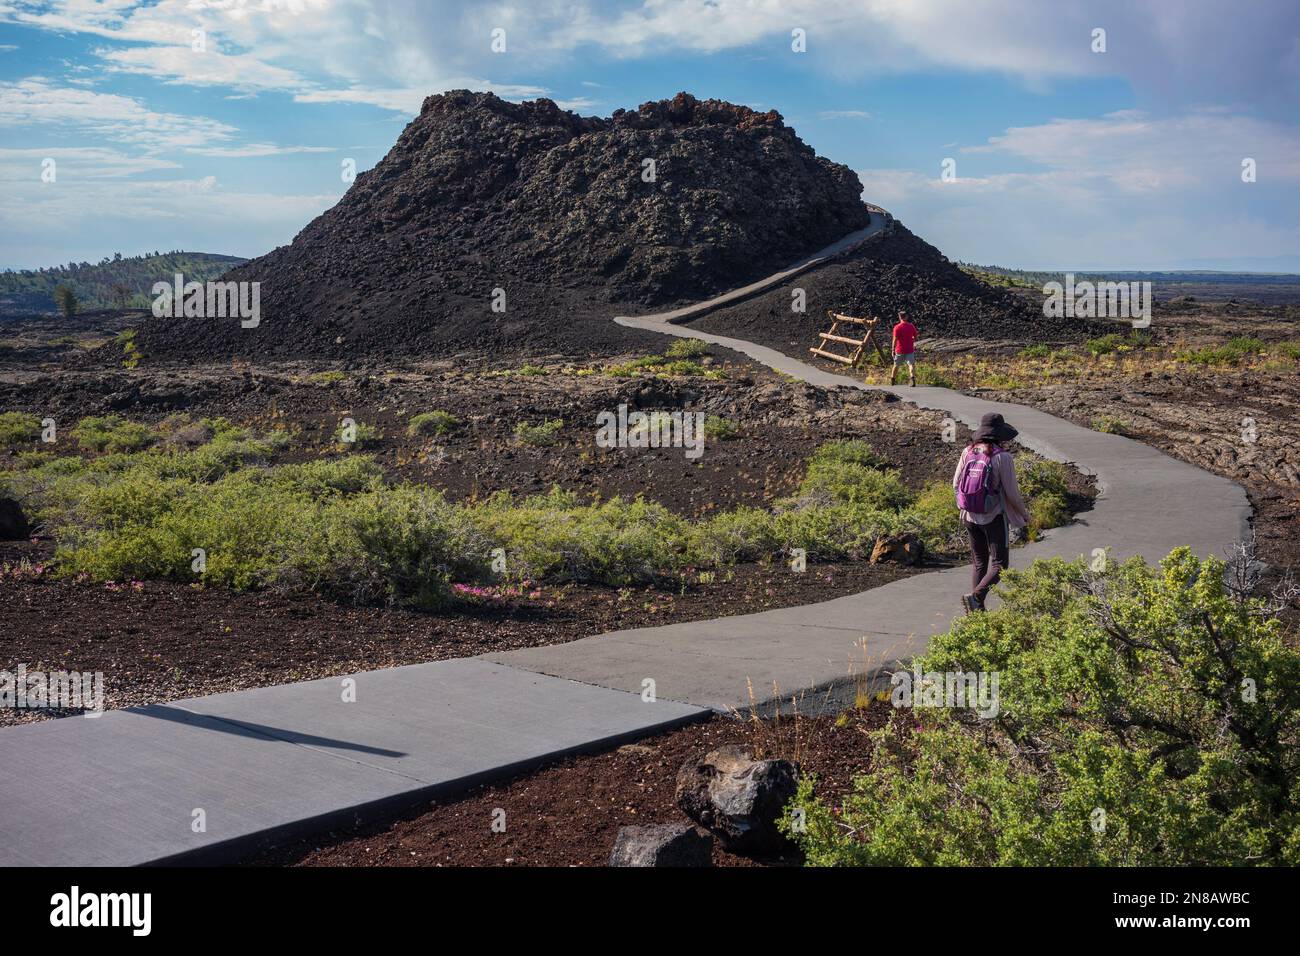 Craters of the Moon National Monument and Preserve near Arco, Idaho is a large ocean of lava flows with scattered islands of cinder cones and sagebrus Stock Photo